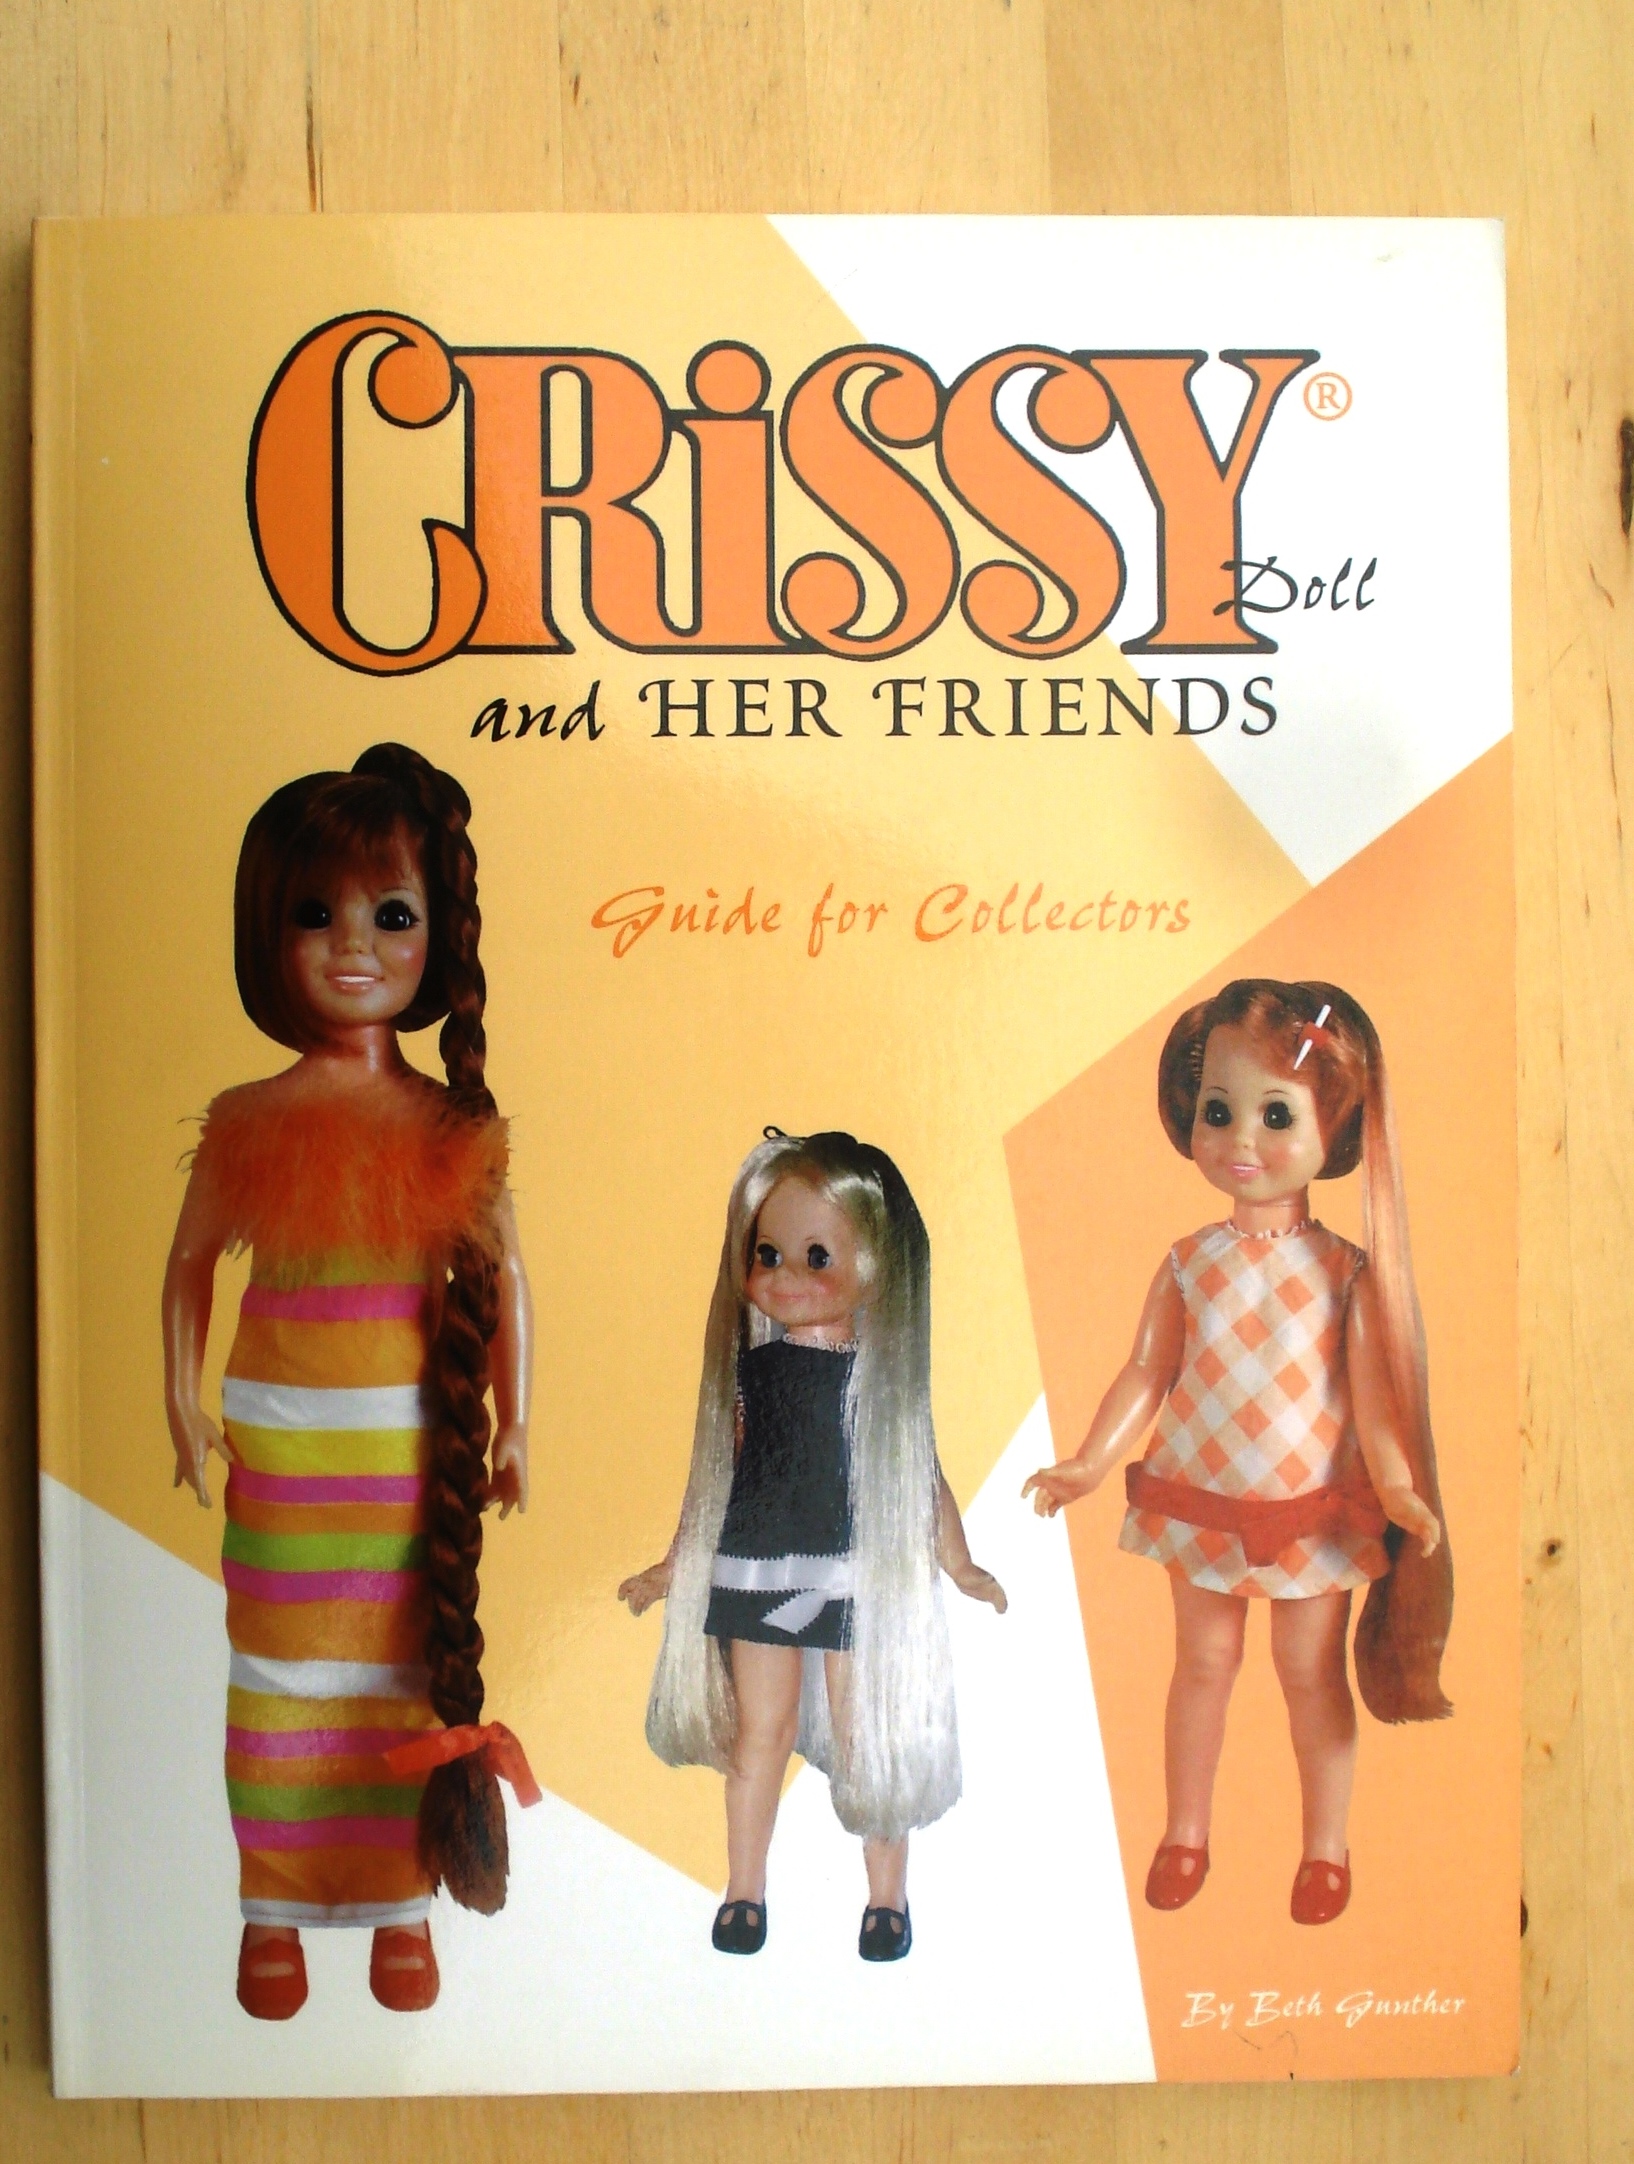 CRISSY DOLL and HER FRIENDS Guide de collectionneur